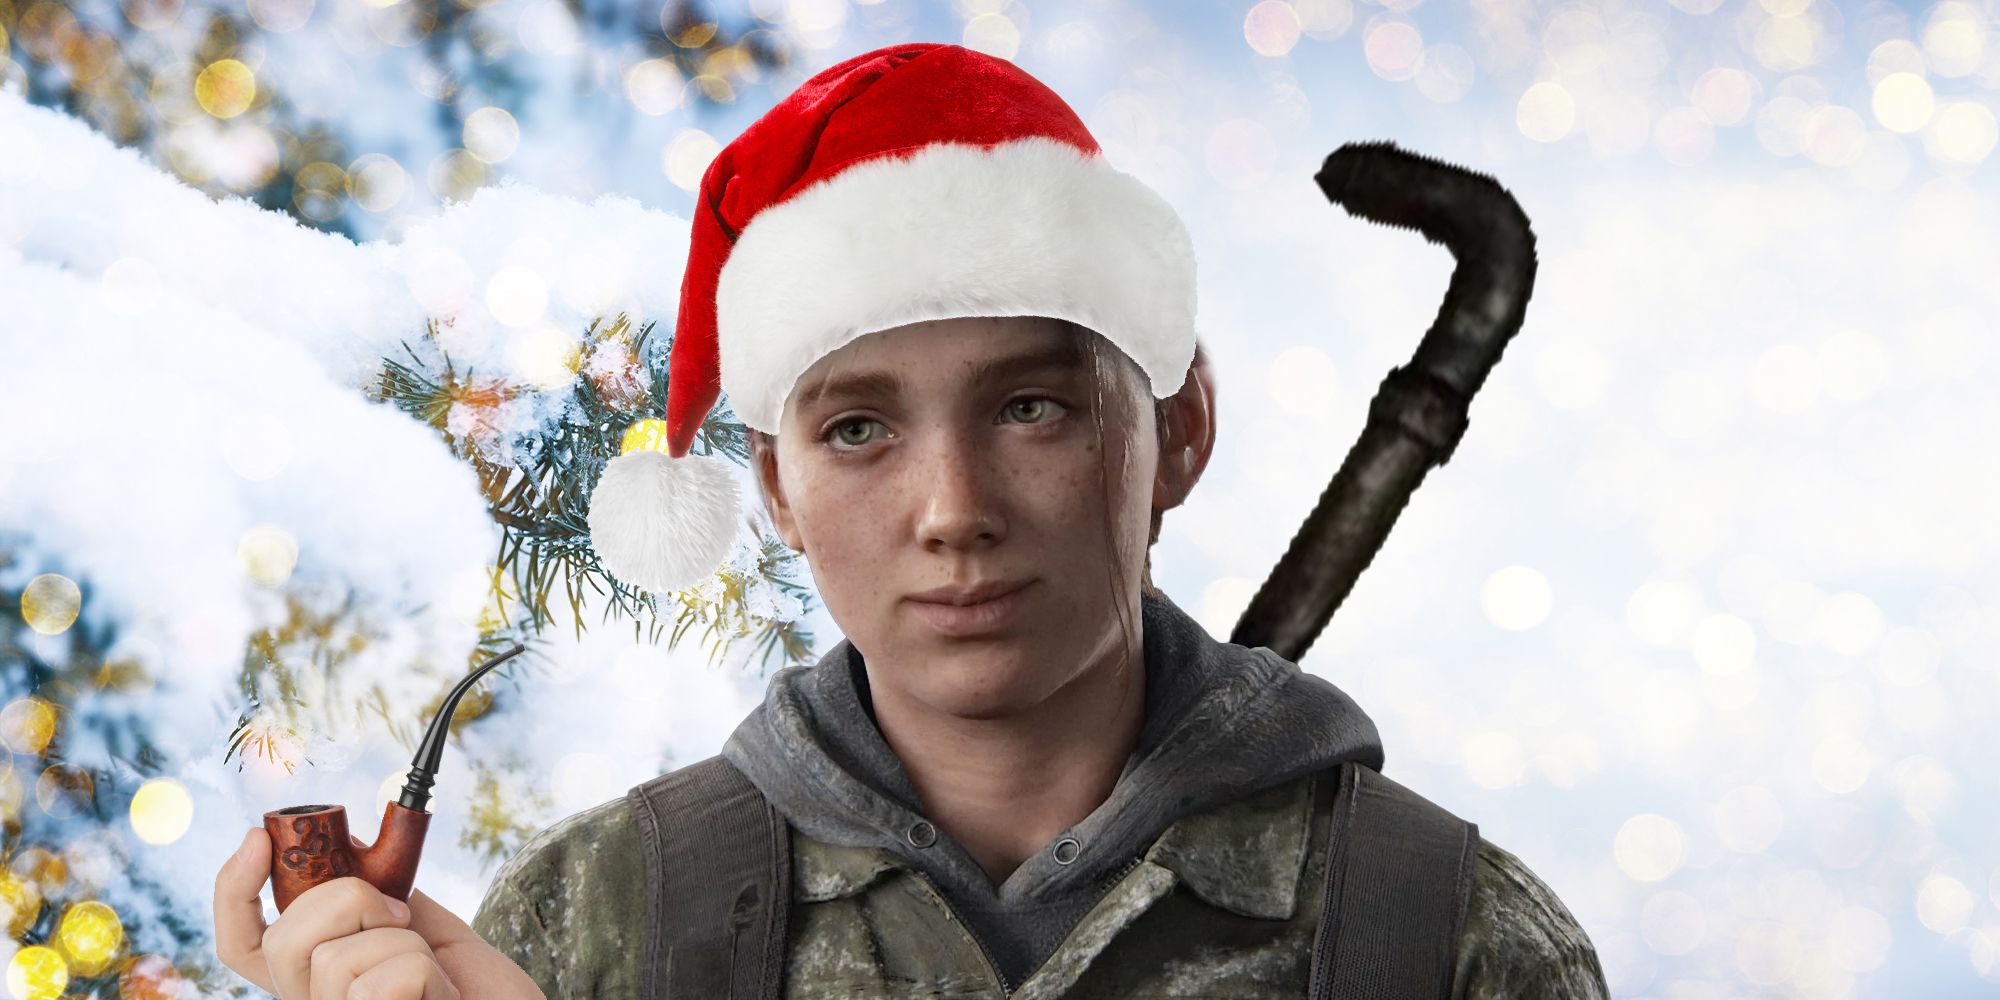 Ellie from The Last of Us wearing a Christmas hat